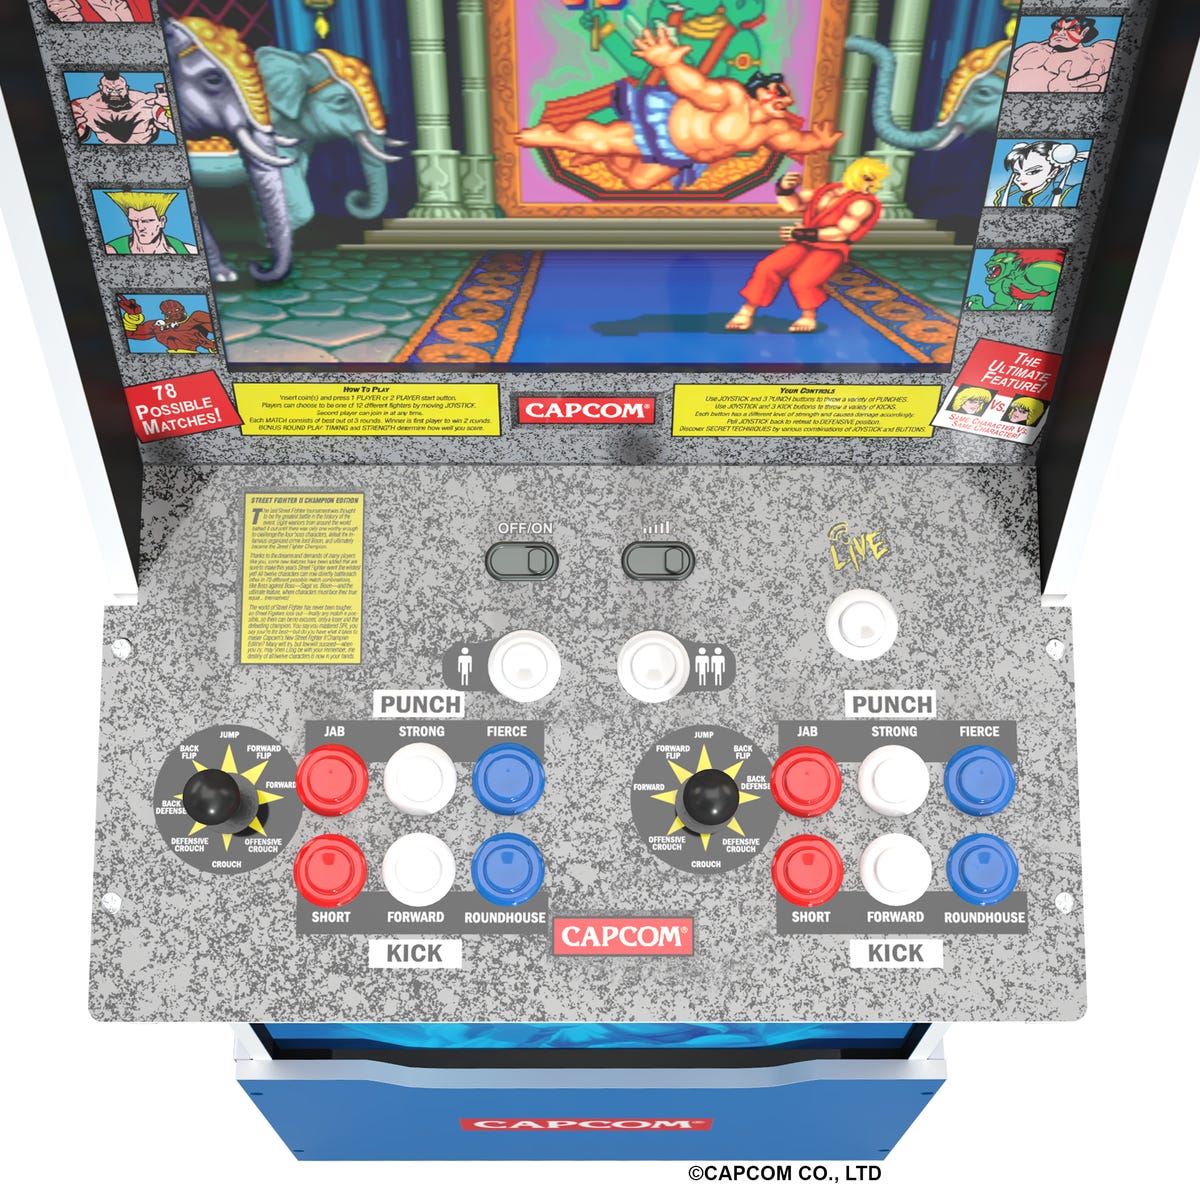 All the retro fighting action you need in one machine.